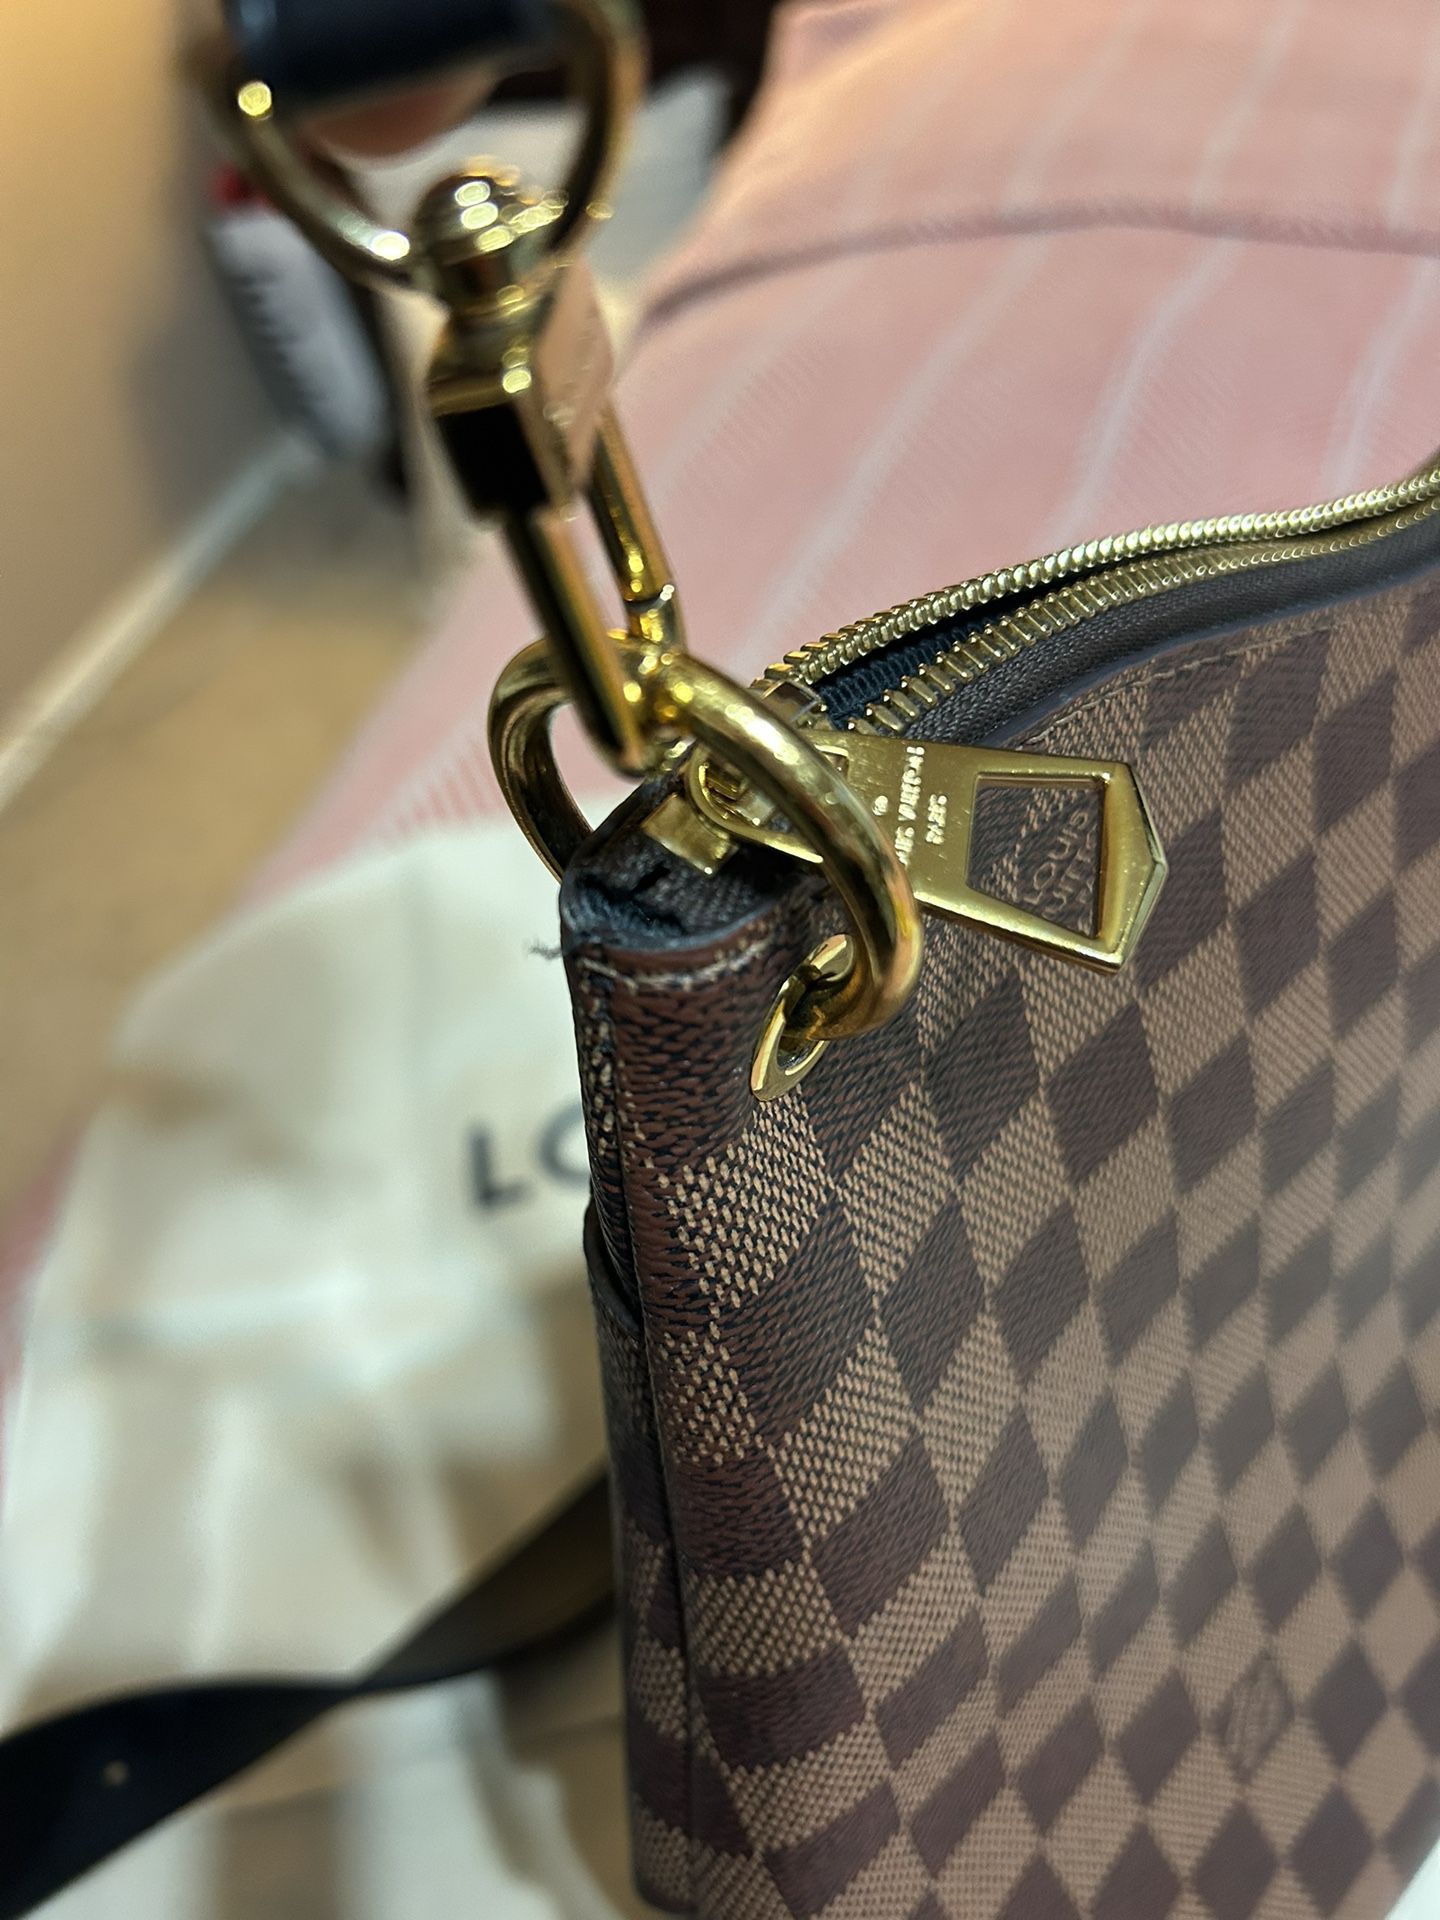 Louis Vuitton Odeon MM for Sale in Alexandria, KY - OfferUp